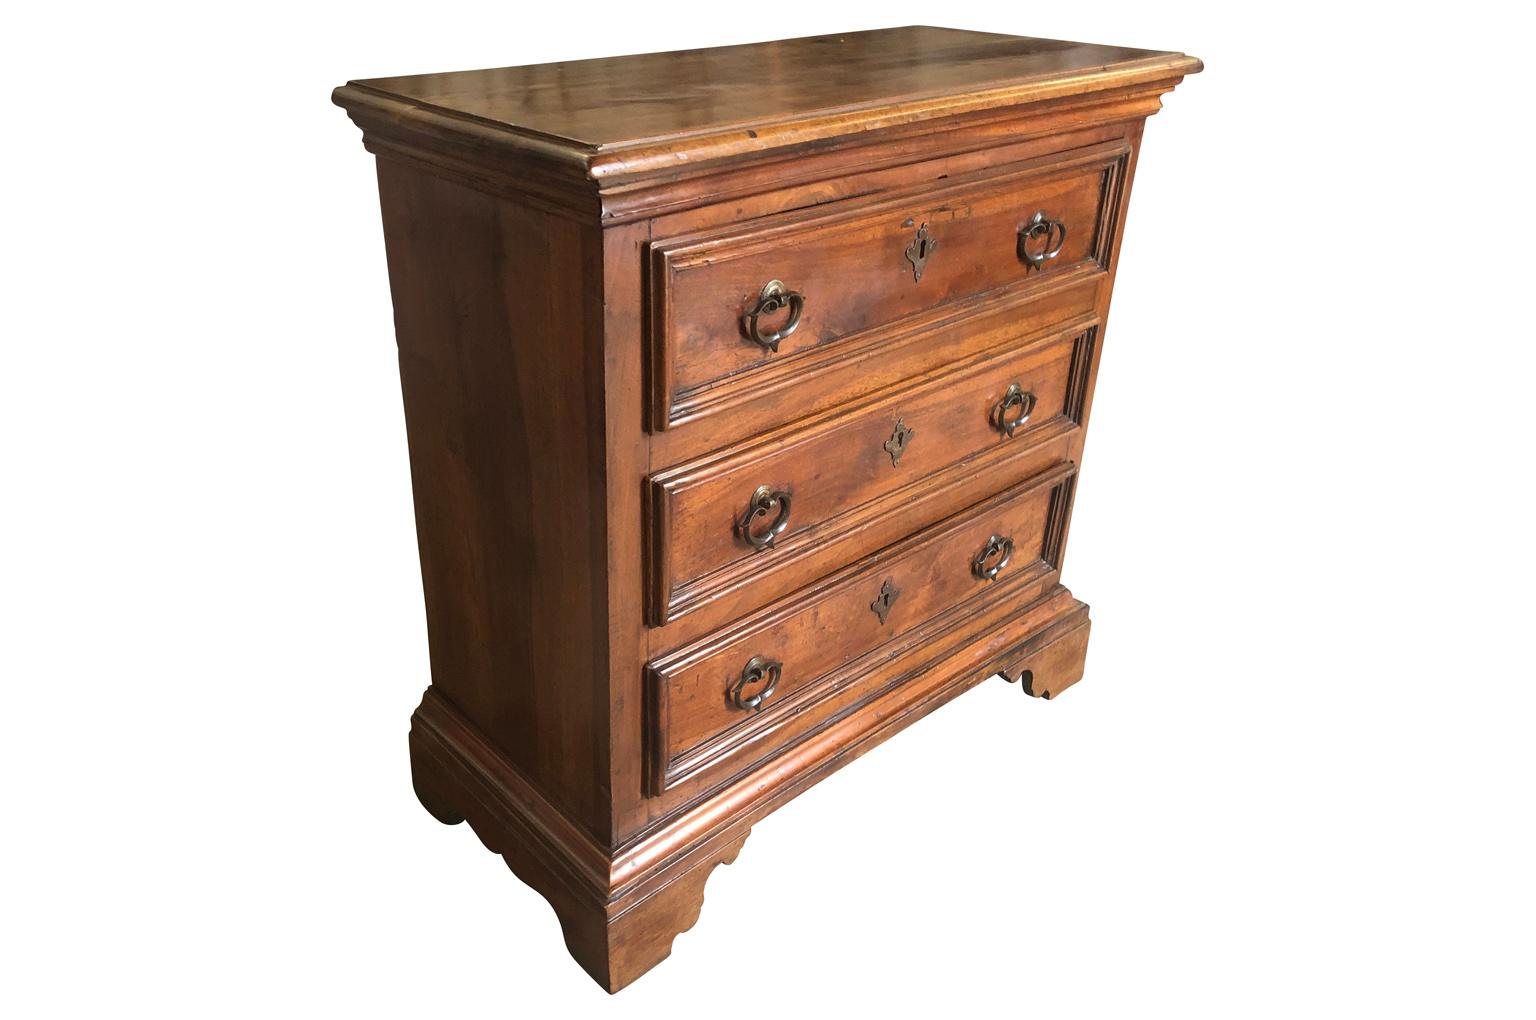 A very lovely 18th century commode from the Lombardi region of Italy. Soundly constructed from walnut. Wonderful patina. Three drawers over bracket feet.